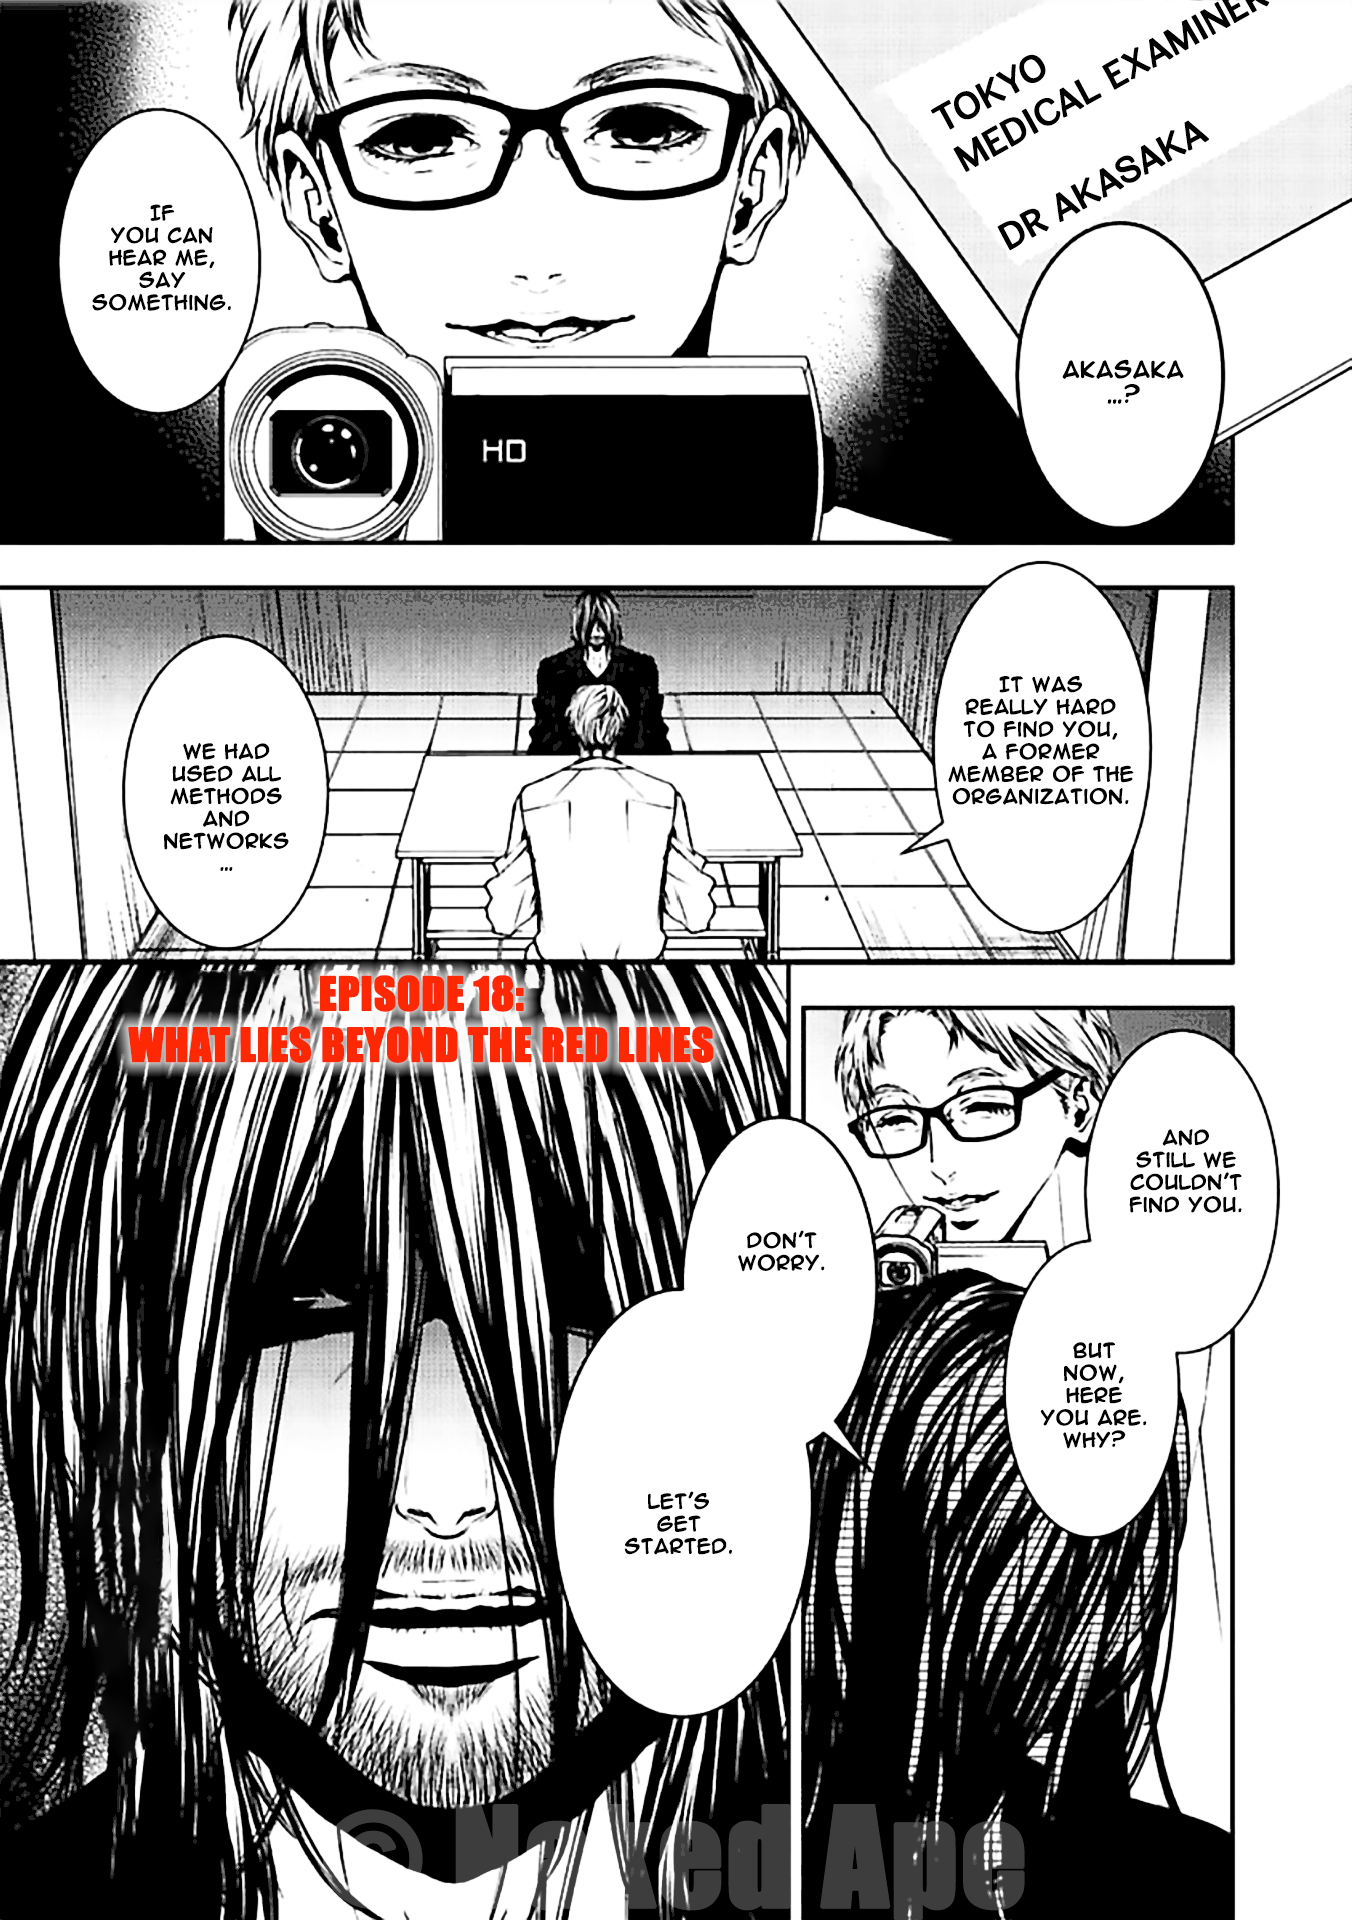 Suicide Line Vol.3 Chapter 18: Episode 18: What Lies Beyond The Red Lines - Picture 1